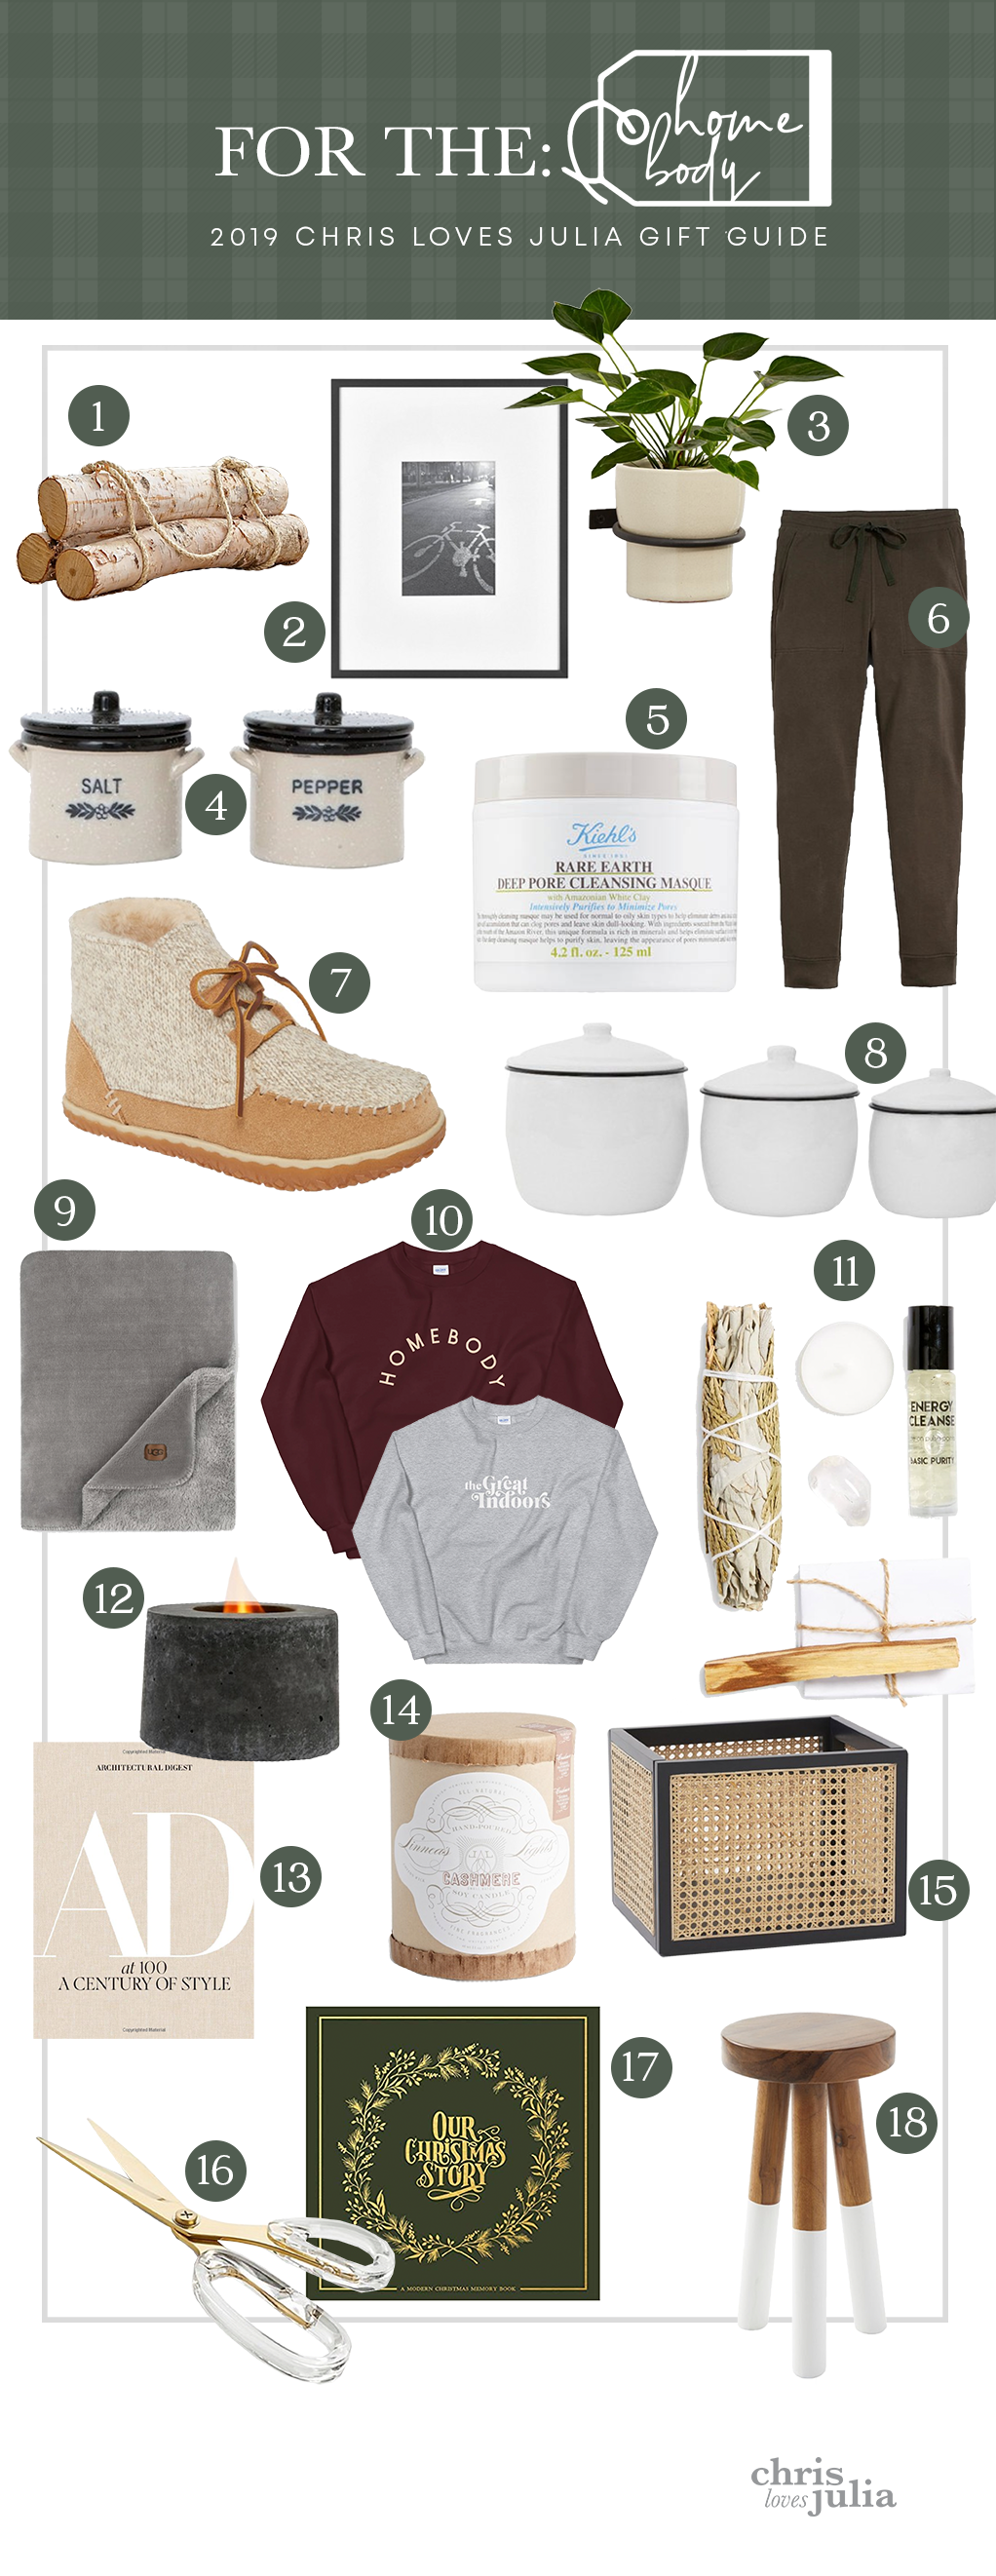 2019 CLJ HOLIDAY Gift Guide: Gifts under $20 for Anybody! - Chris